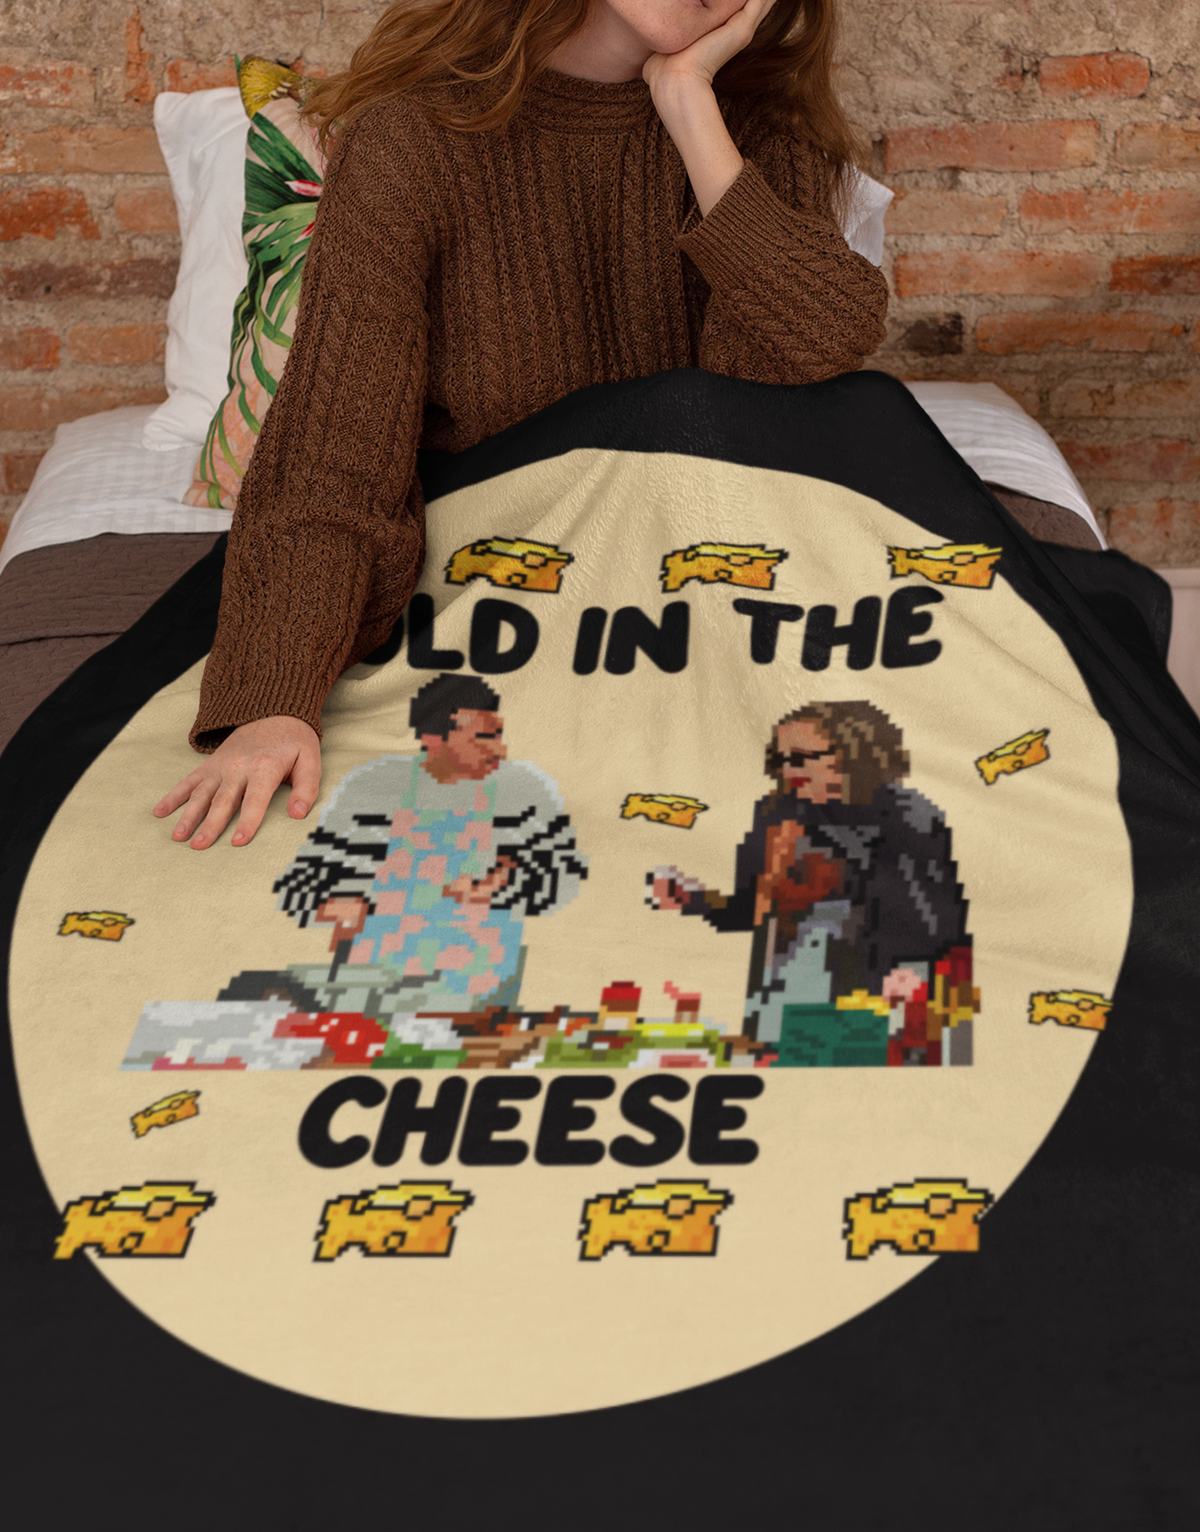 Black blanket with moira and david rose saying fold in the cheese - HighCiti